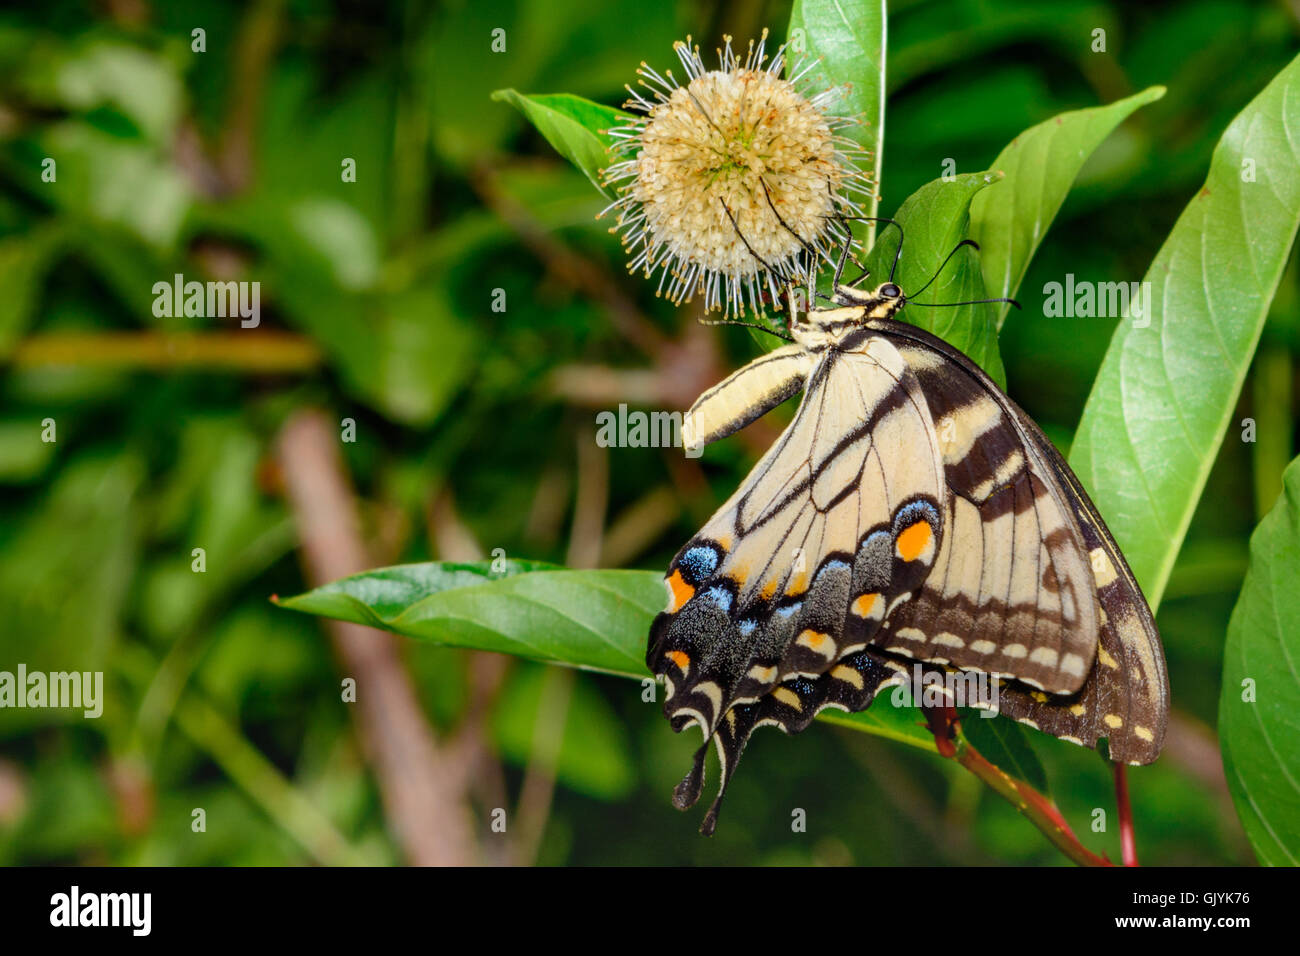 Eastern tiger swallowtail (Papilio glaucus) butterfly with vivid blue yellow and black. side view Stock Photo